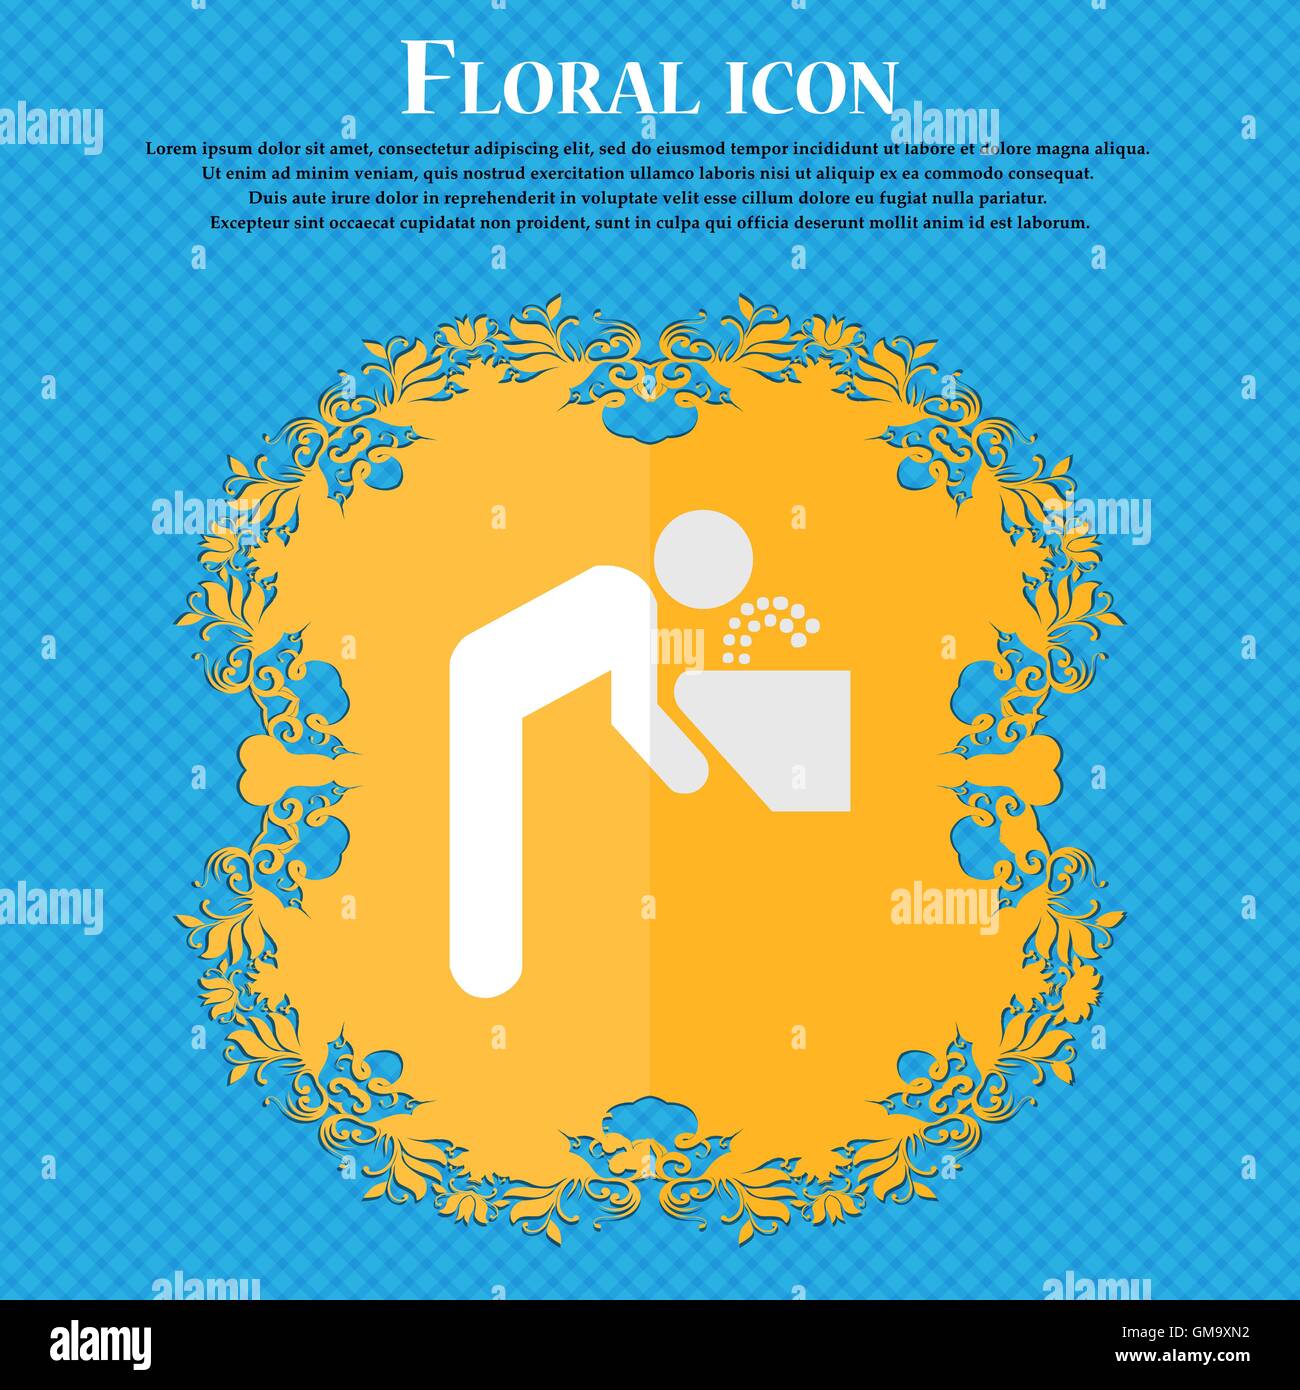 drinking fountain. Floral flat design on a blue abstract background with place for your text. Vector Stock Vector